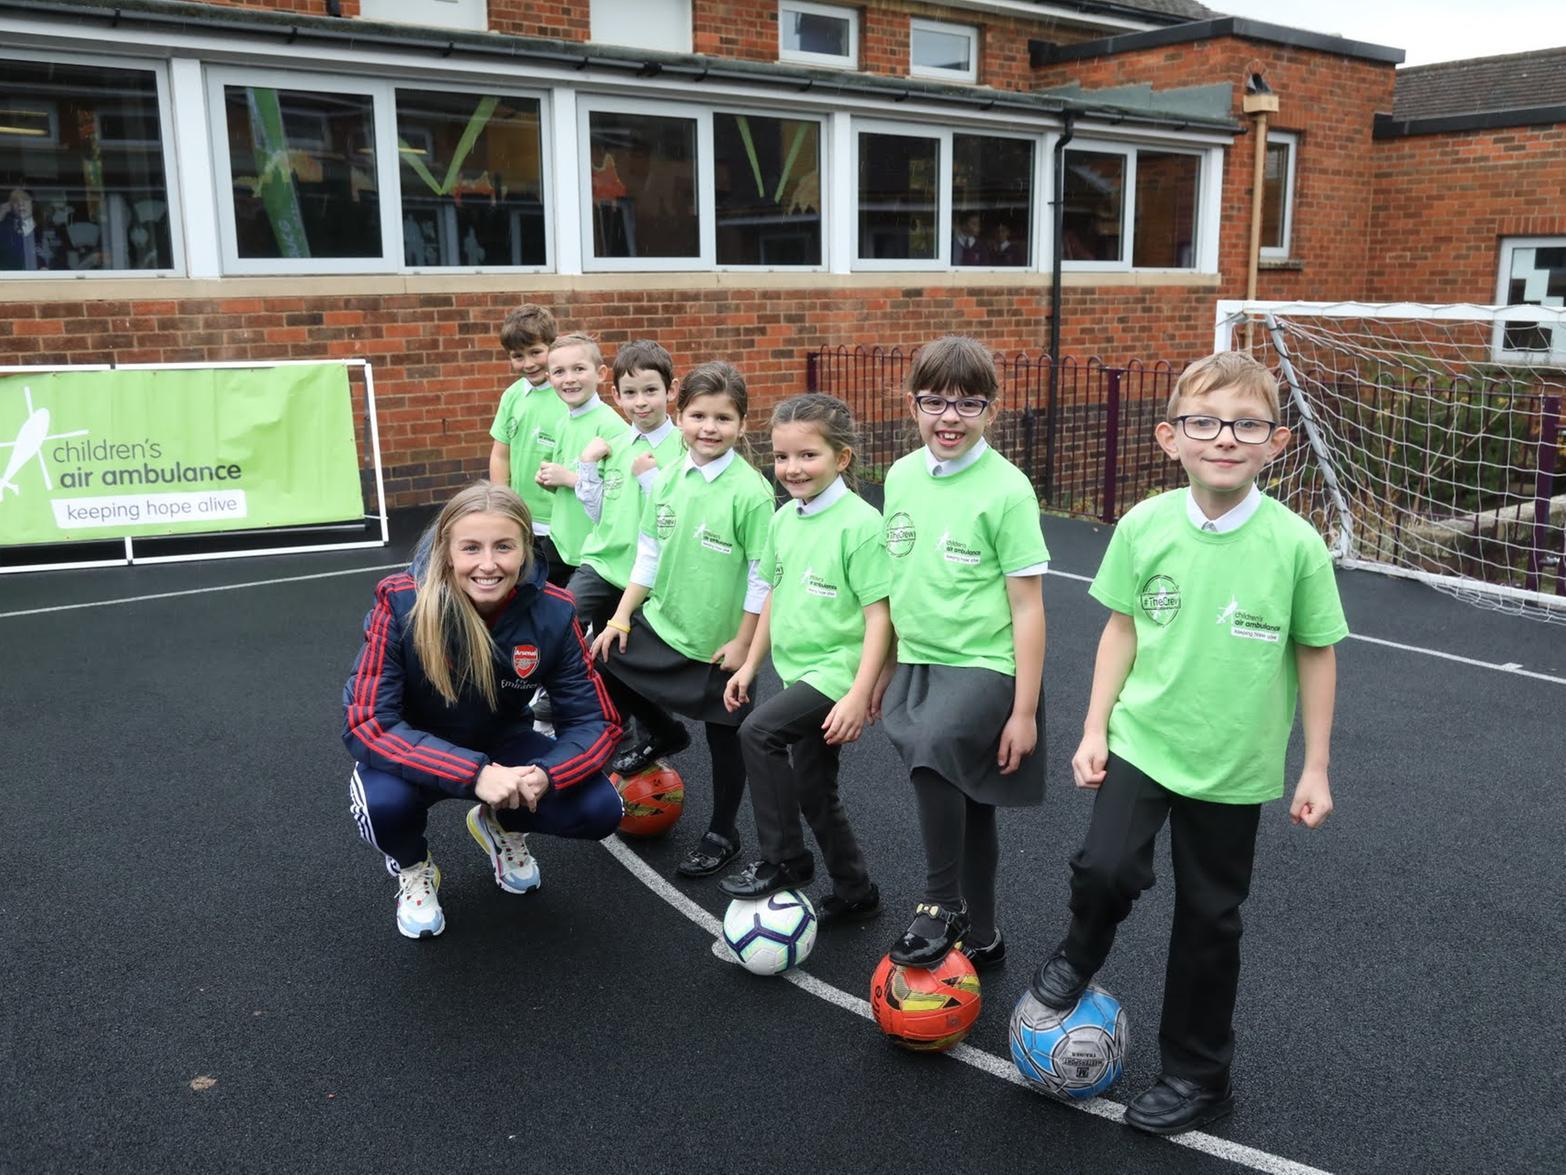 Max won a kickabout with Leah and asked if she would play with him and his friends at Compass Primary Academy